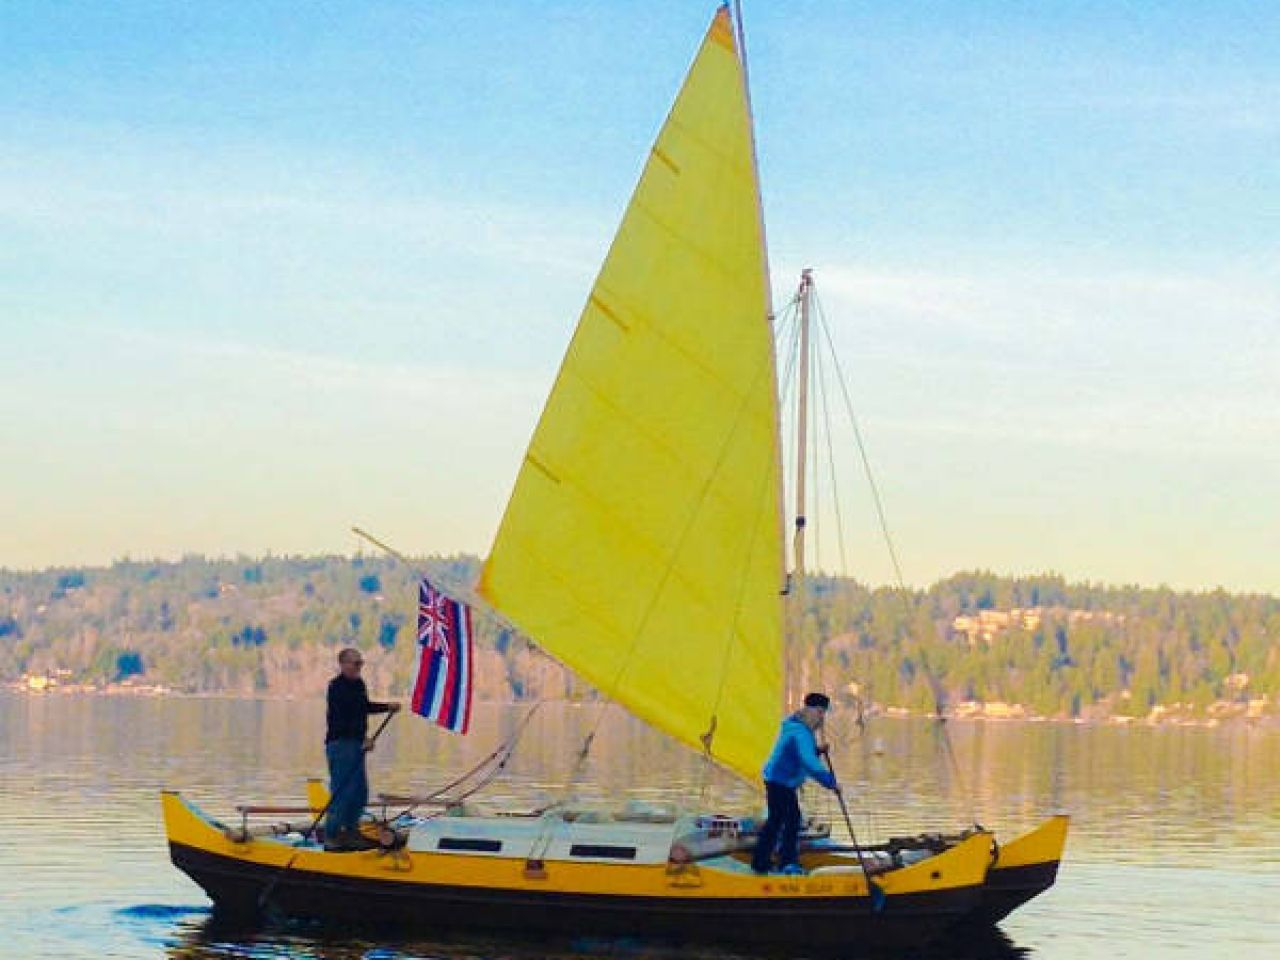 Small double canoe catamaran with yellow sail on the water